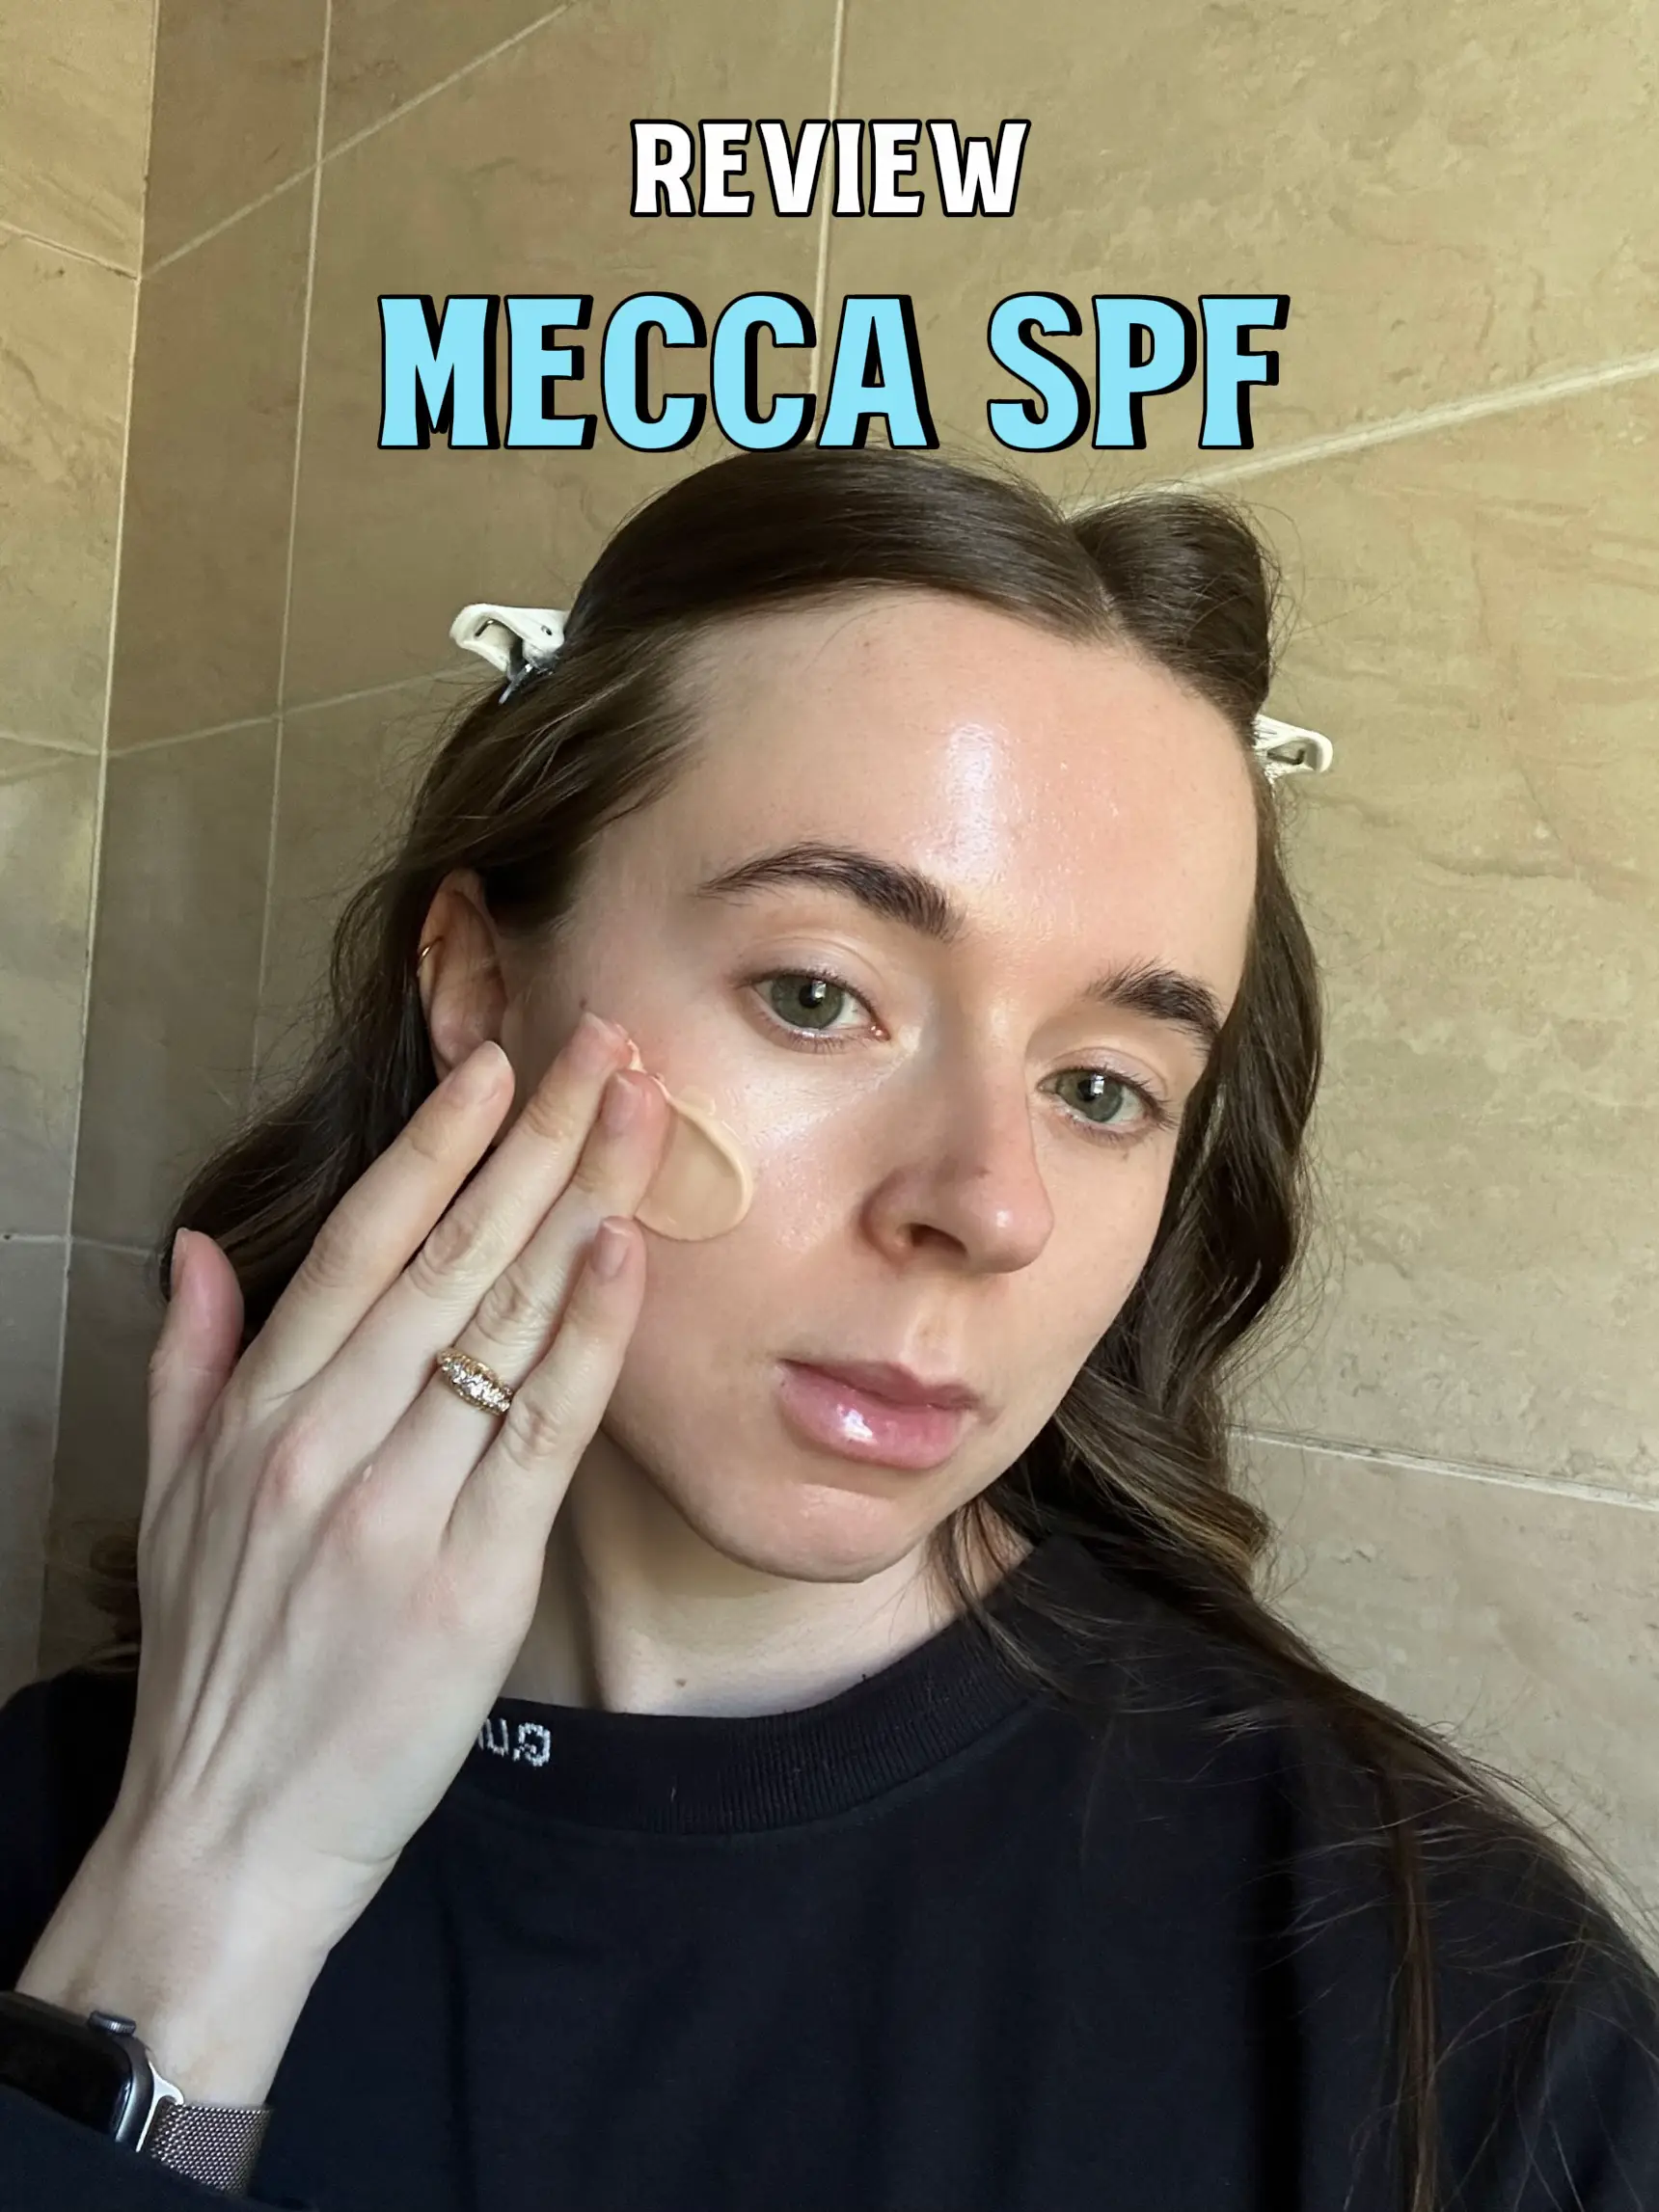 Review Mecca Spf Gallery Posted By